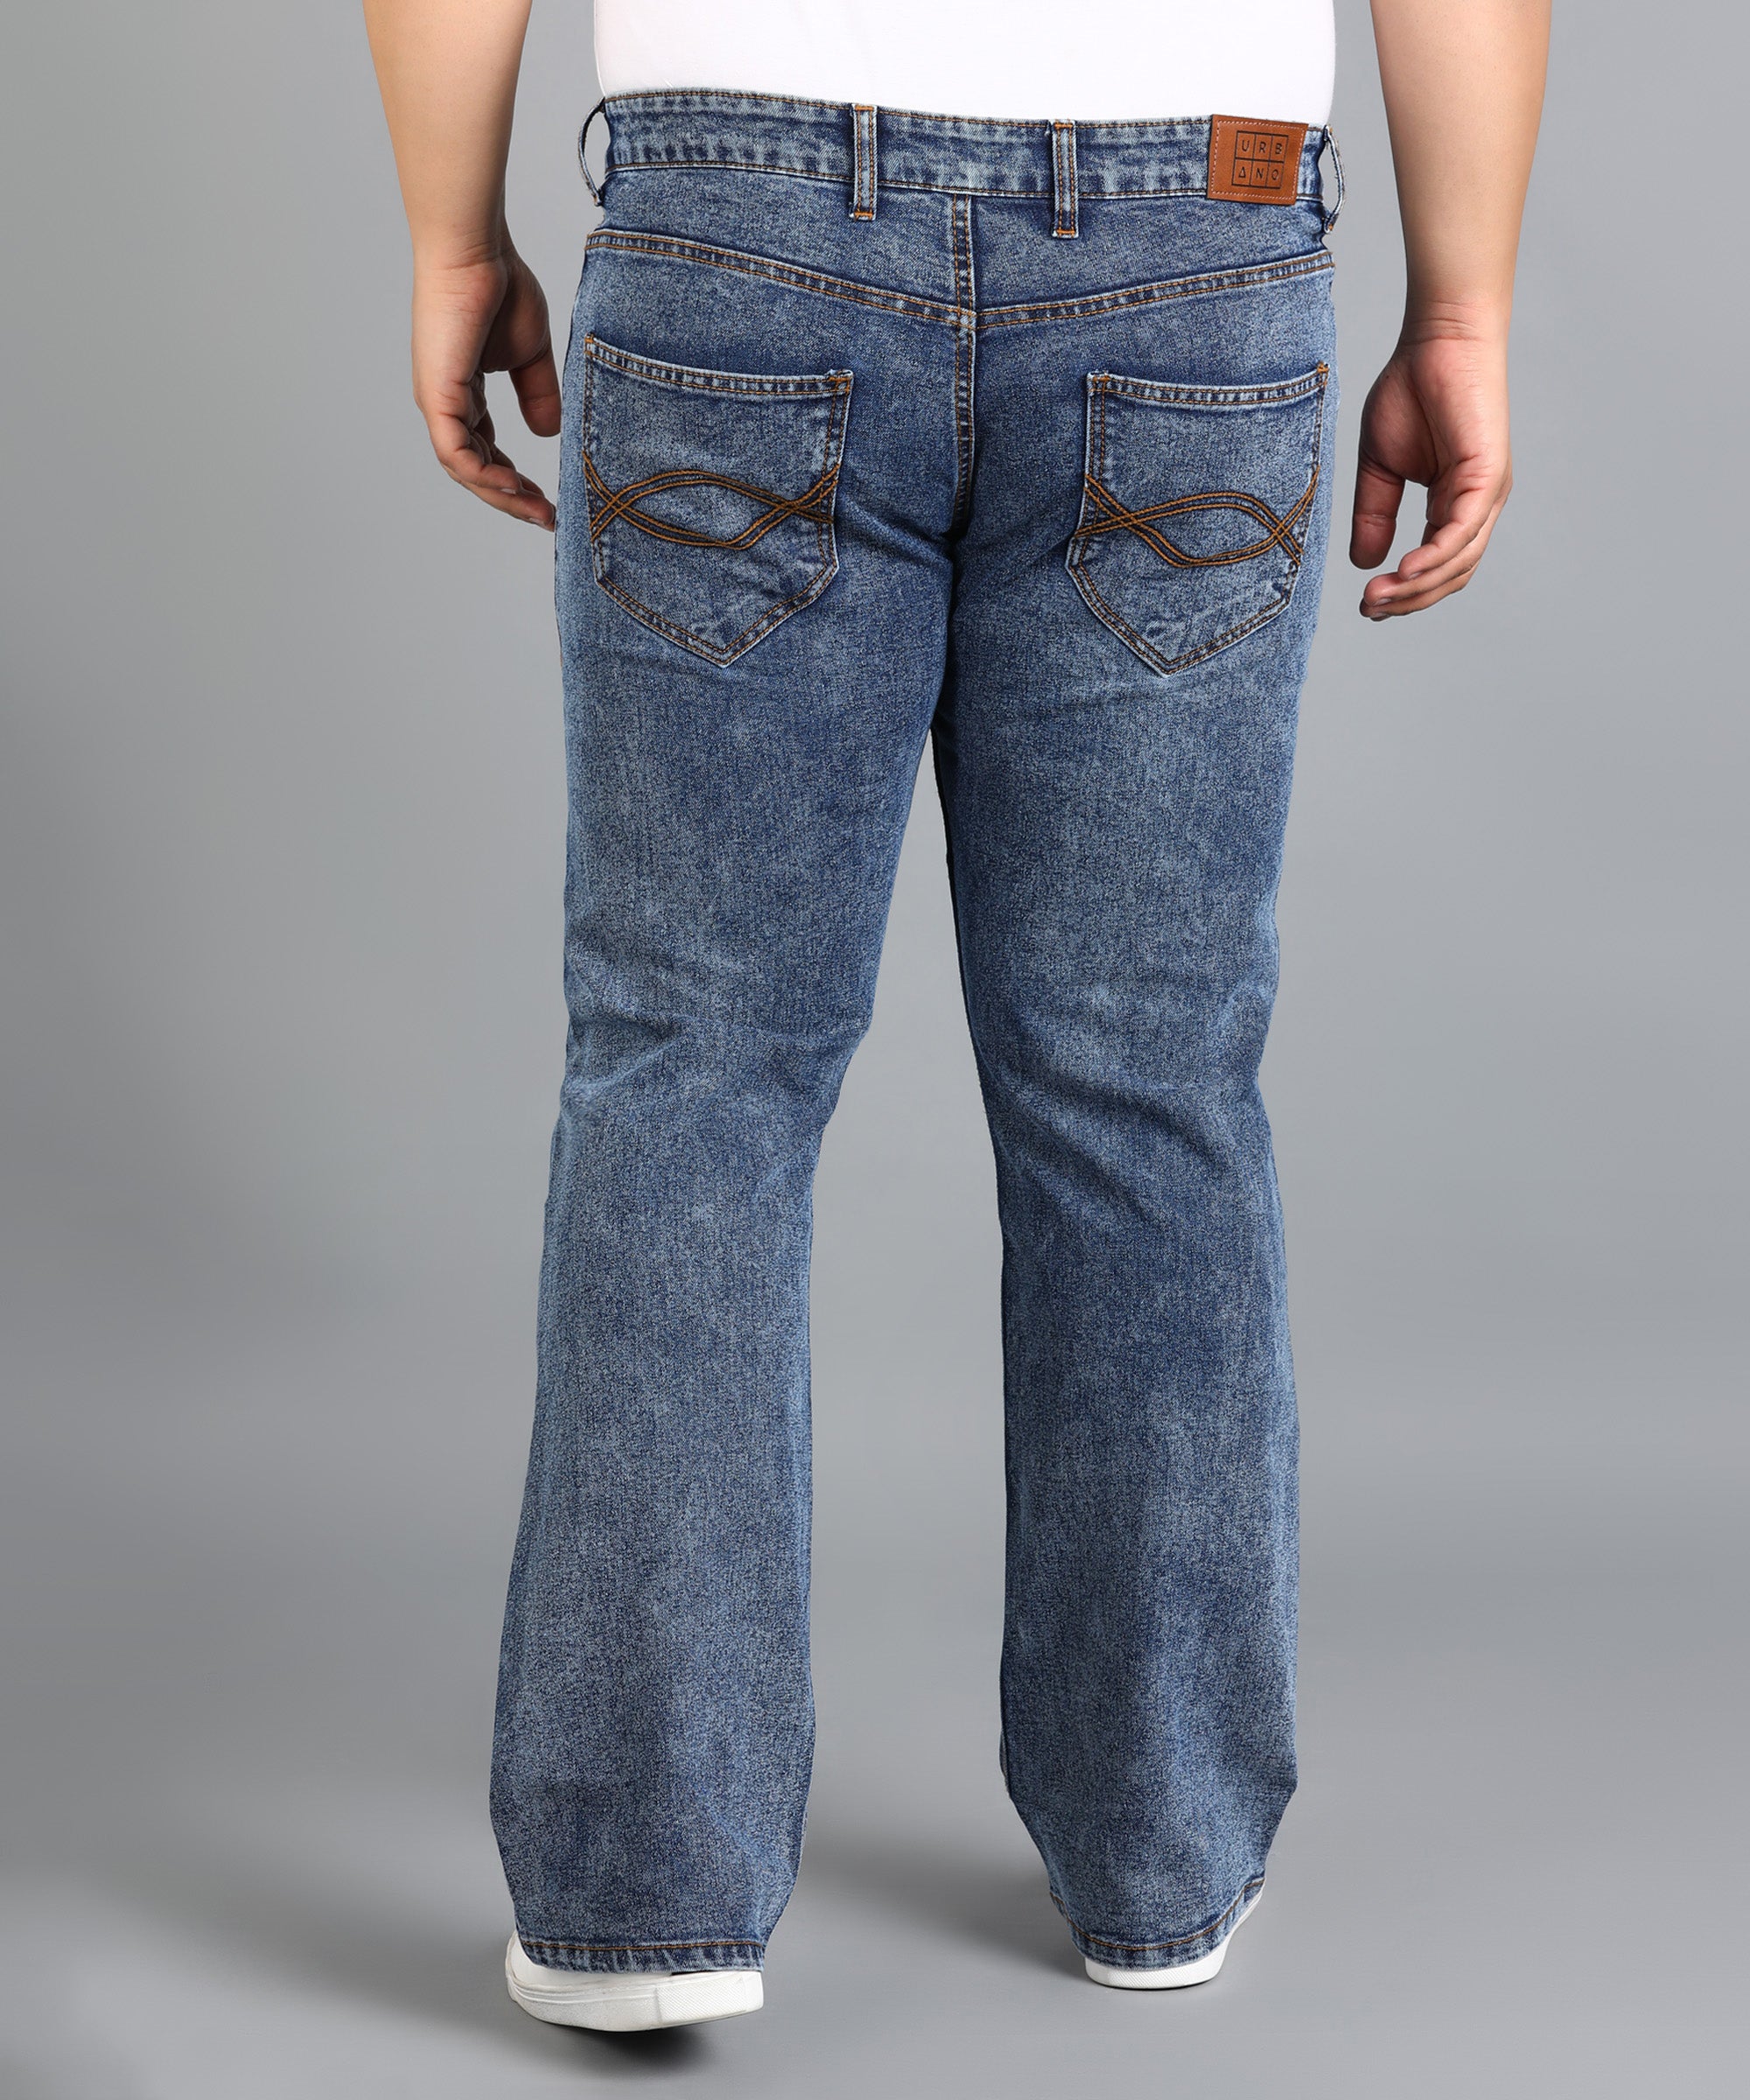 Plus Men's Blue Washed Bootcut Jeans Stretchable